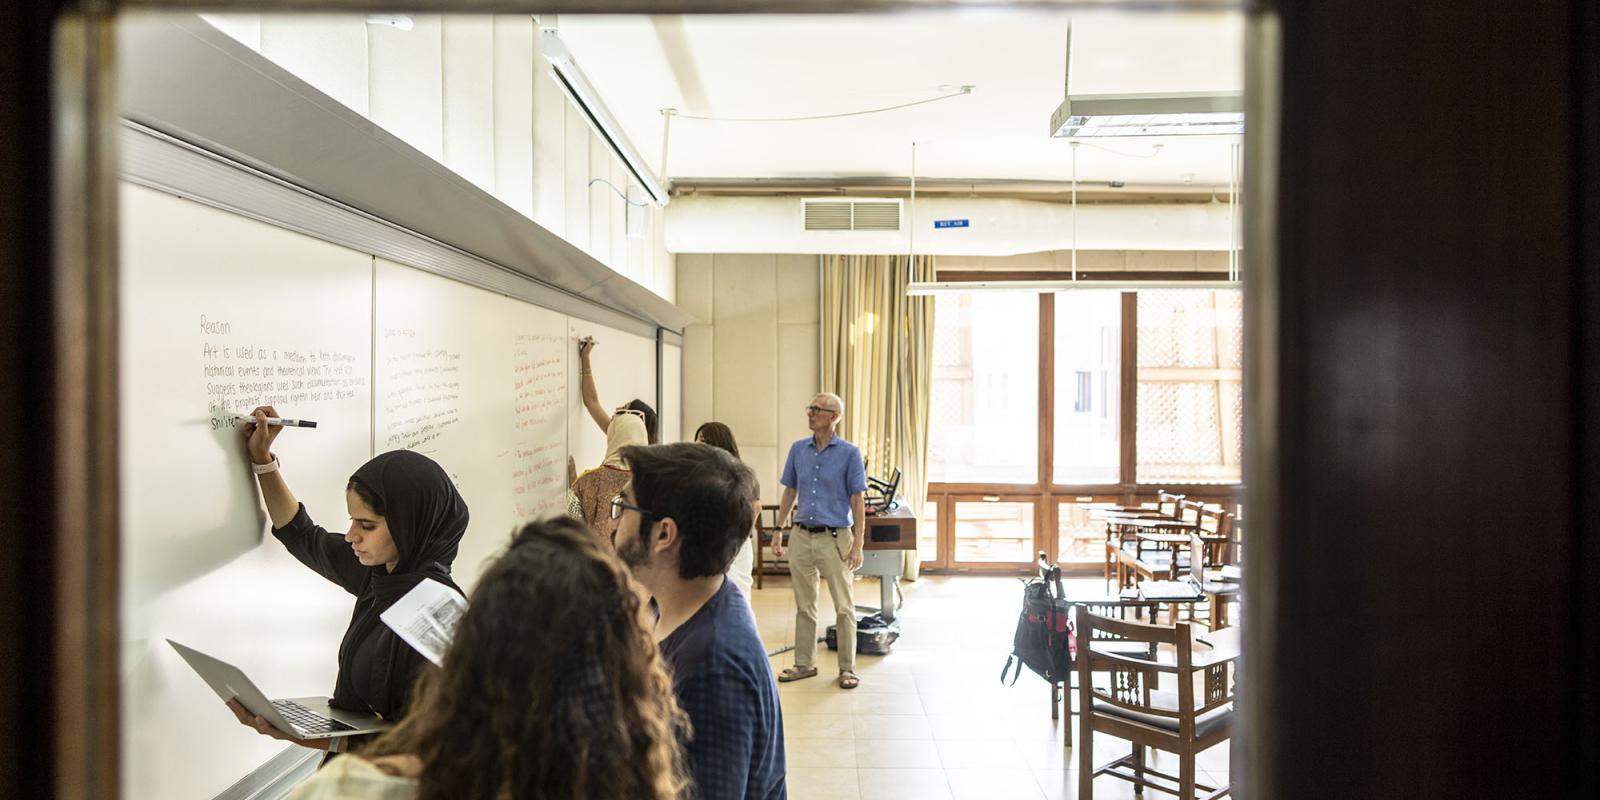 A group of students writing on white board in a classroom